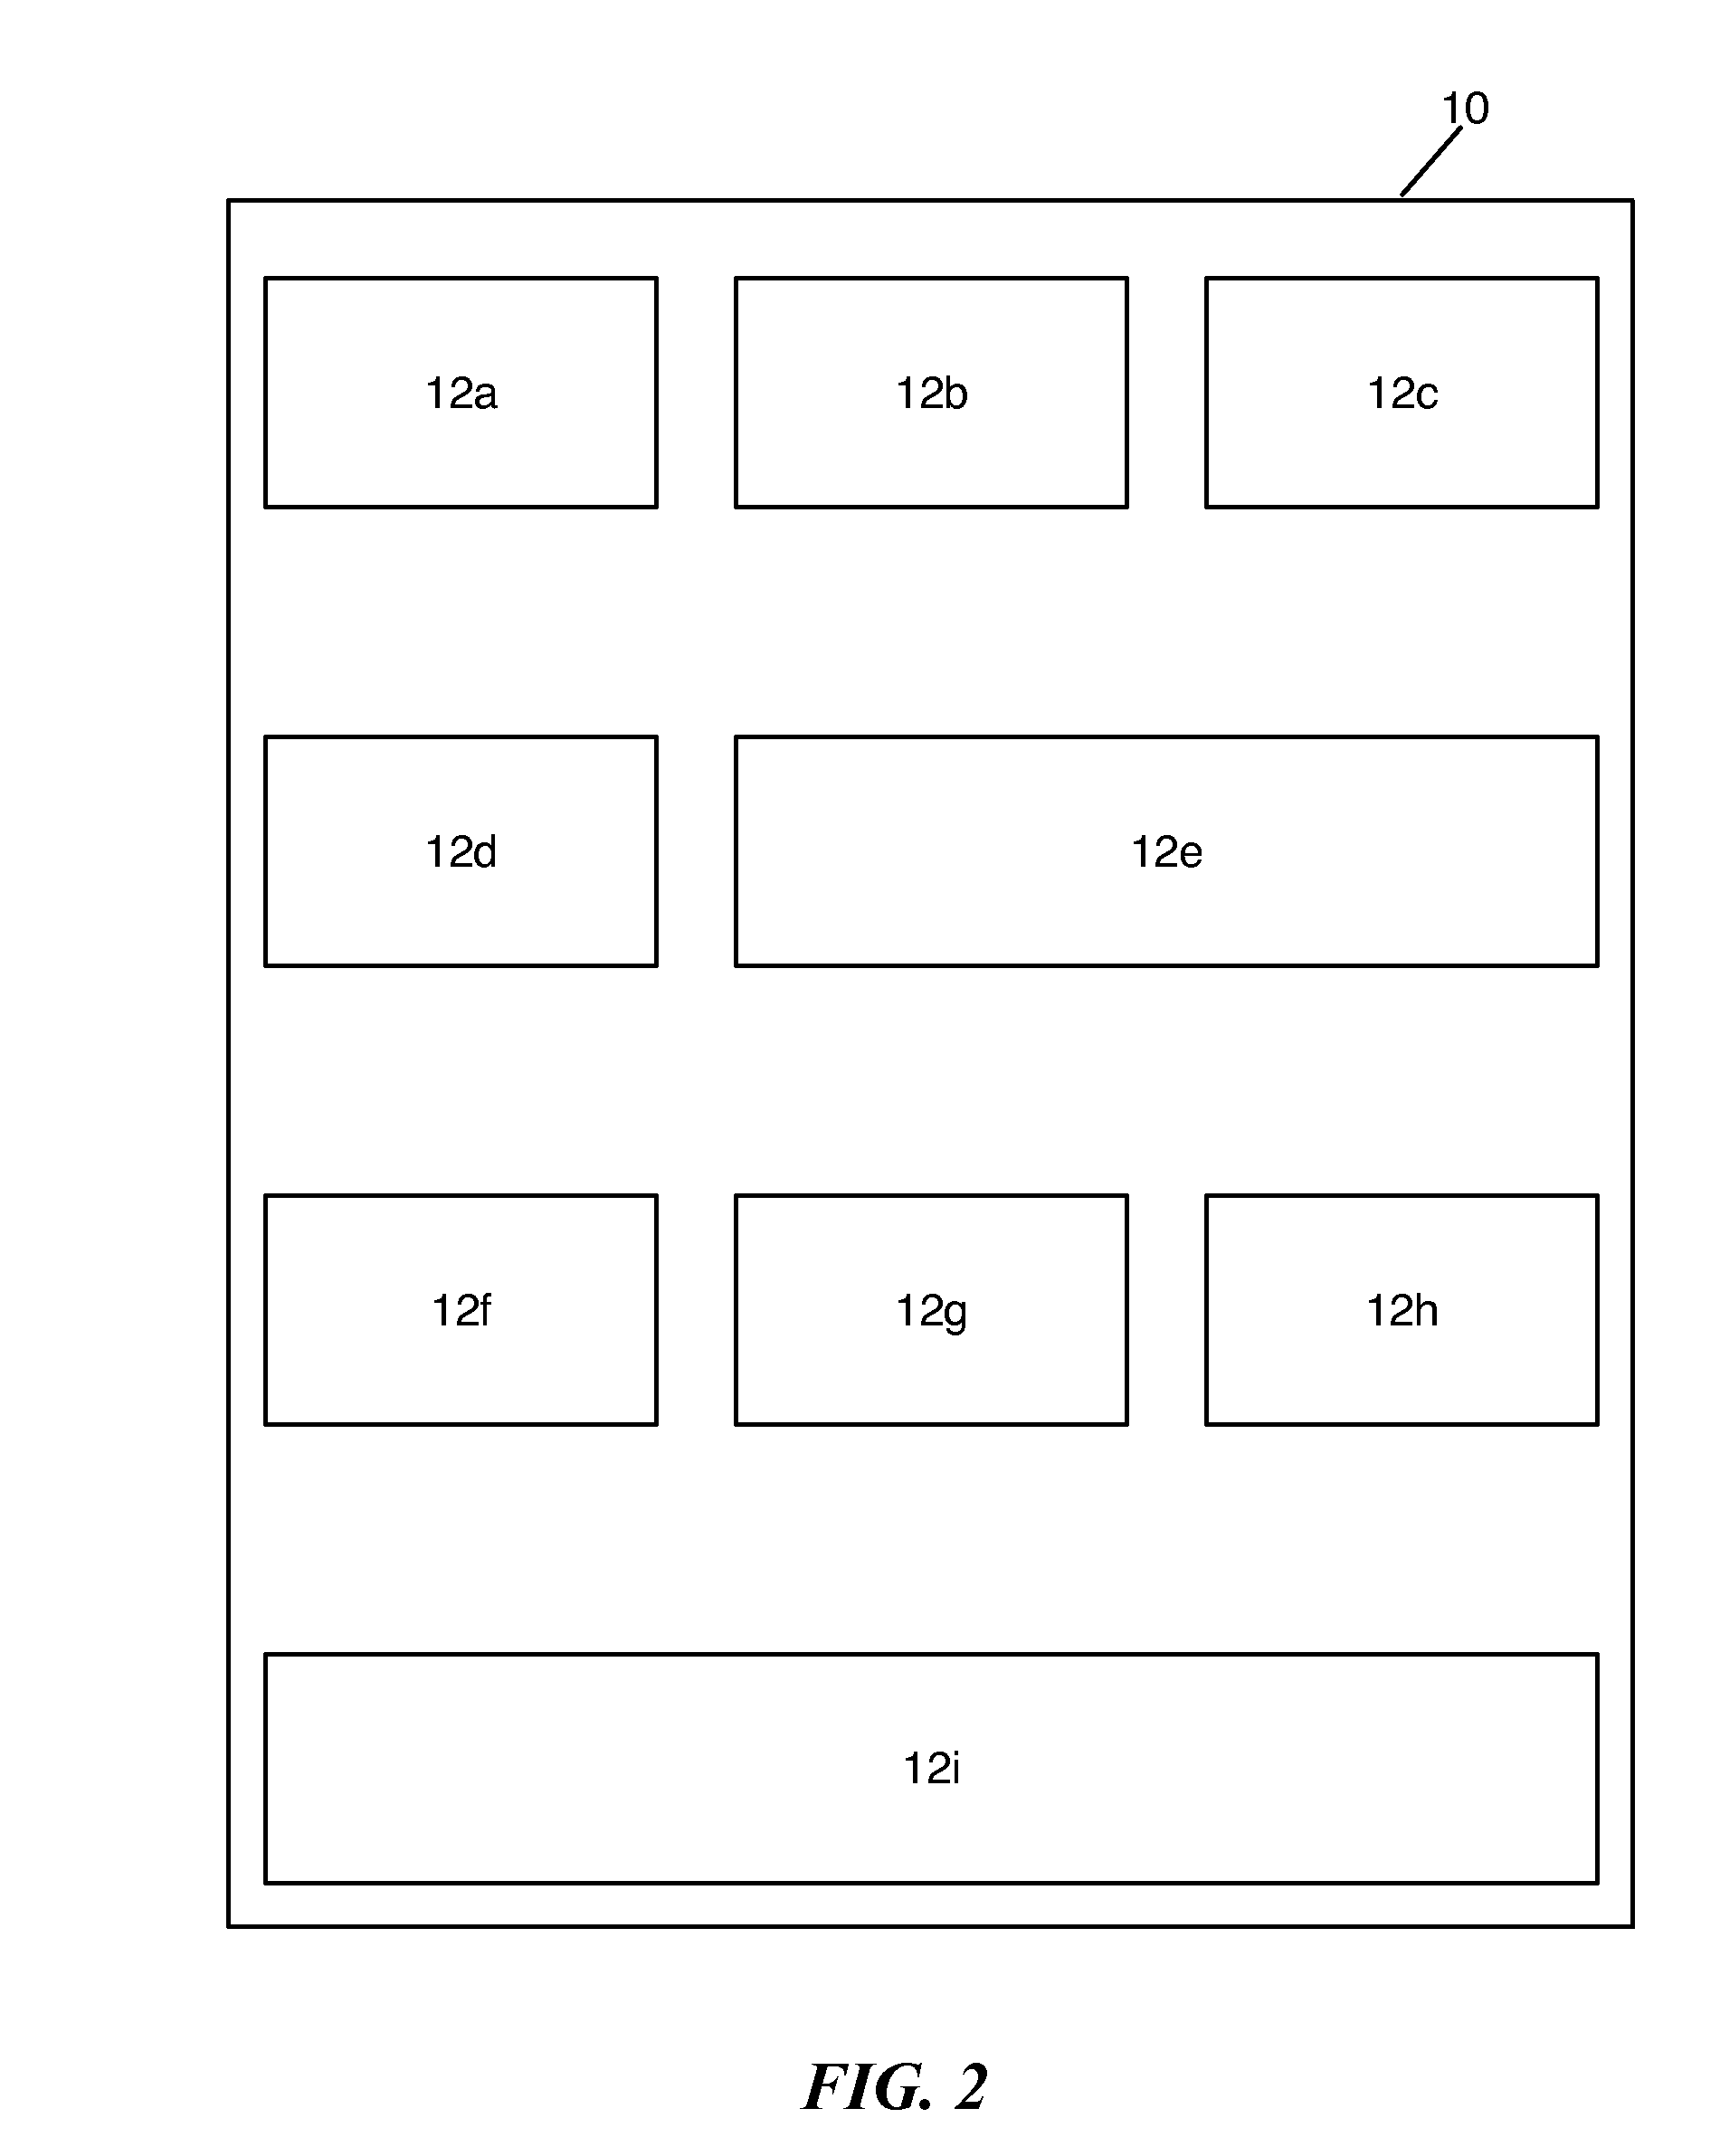 Controlling Element Layout on a Display